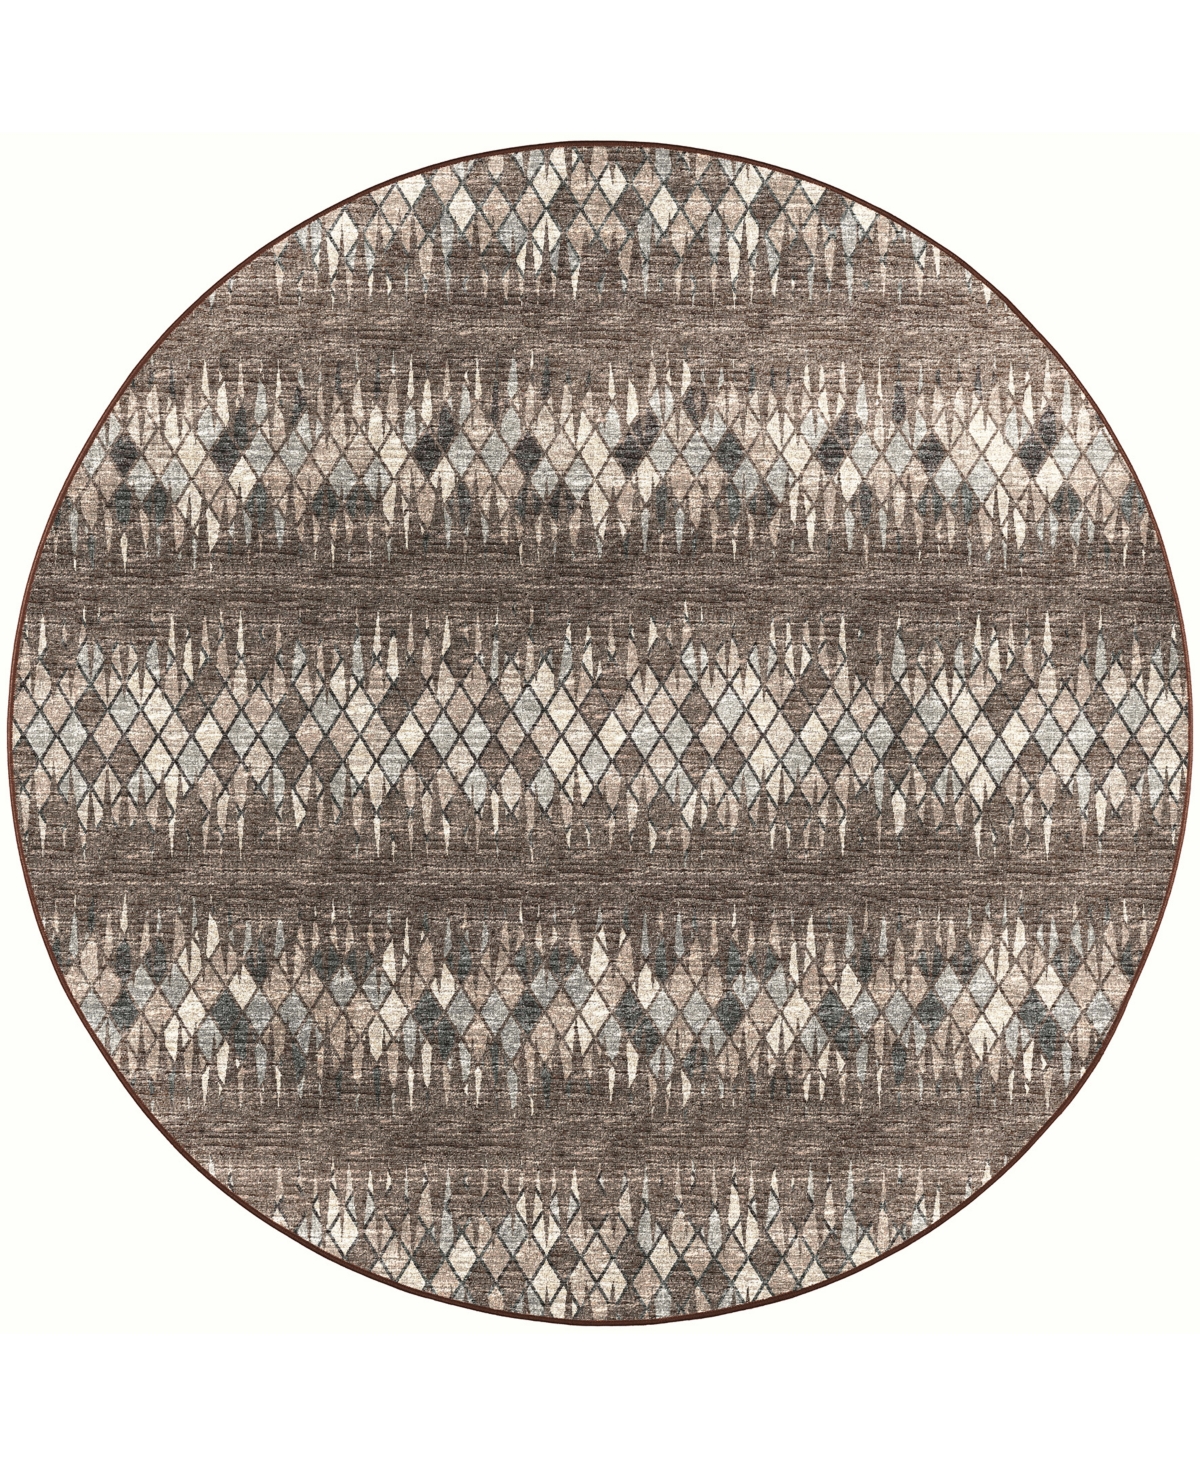 D Style Briggs Brg-5 6' x 6' Round Area Rug - Brown